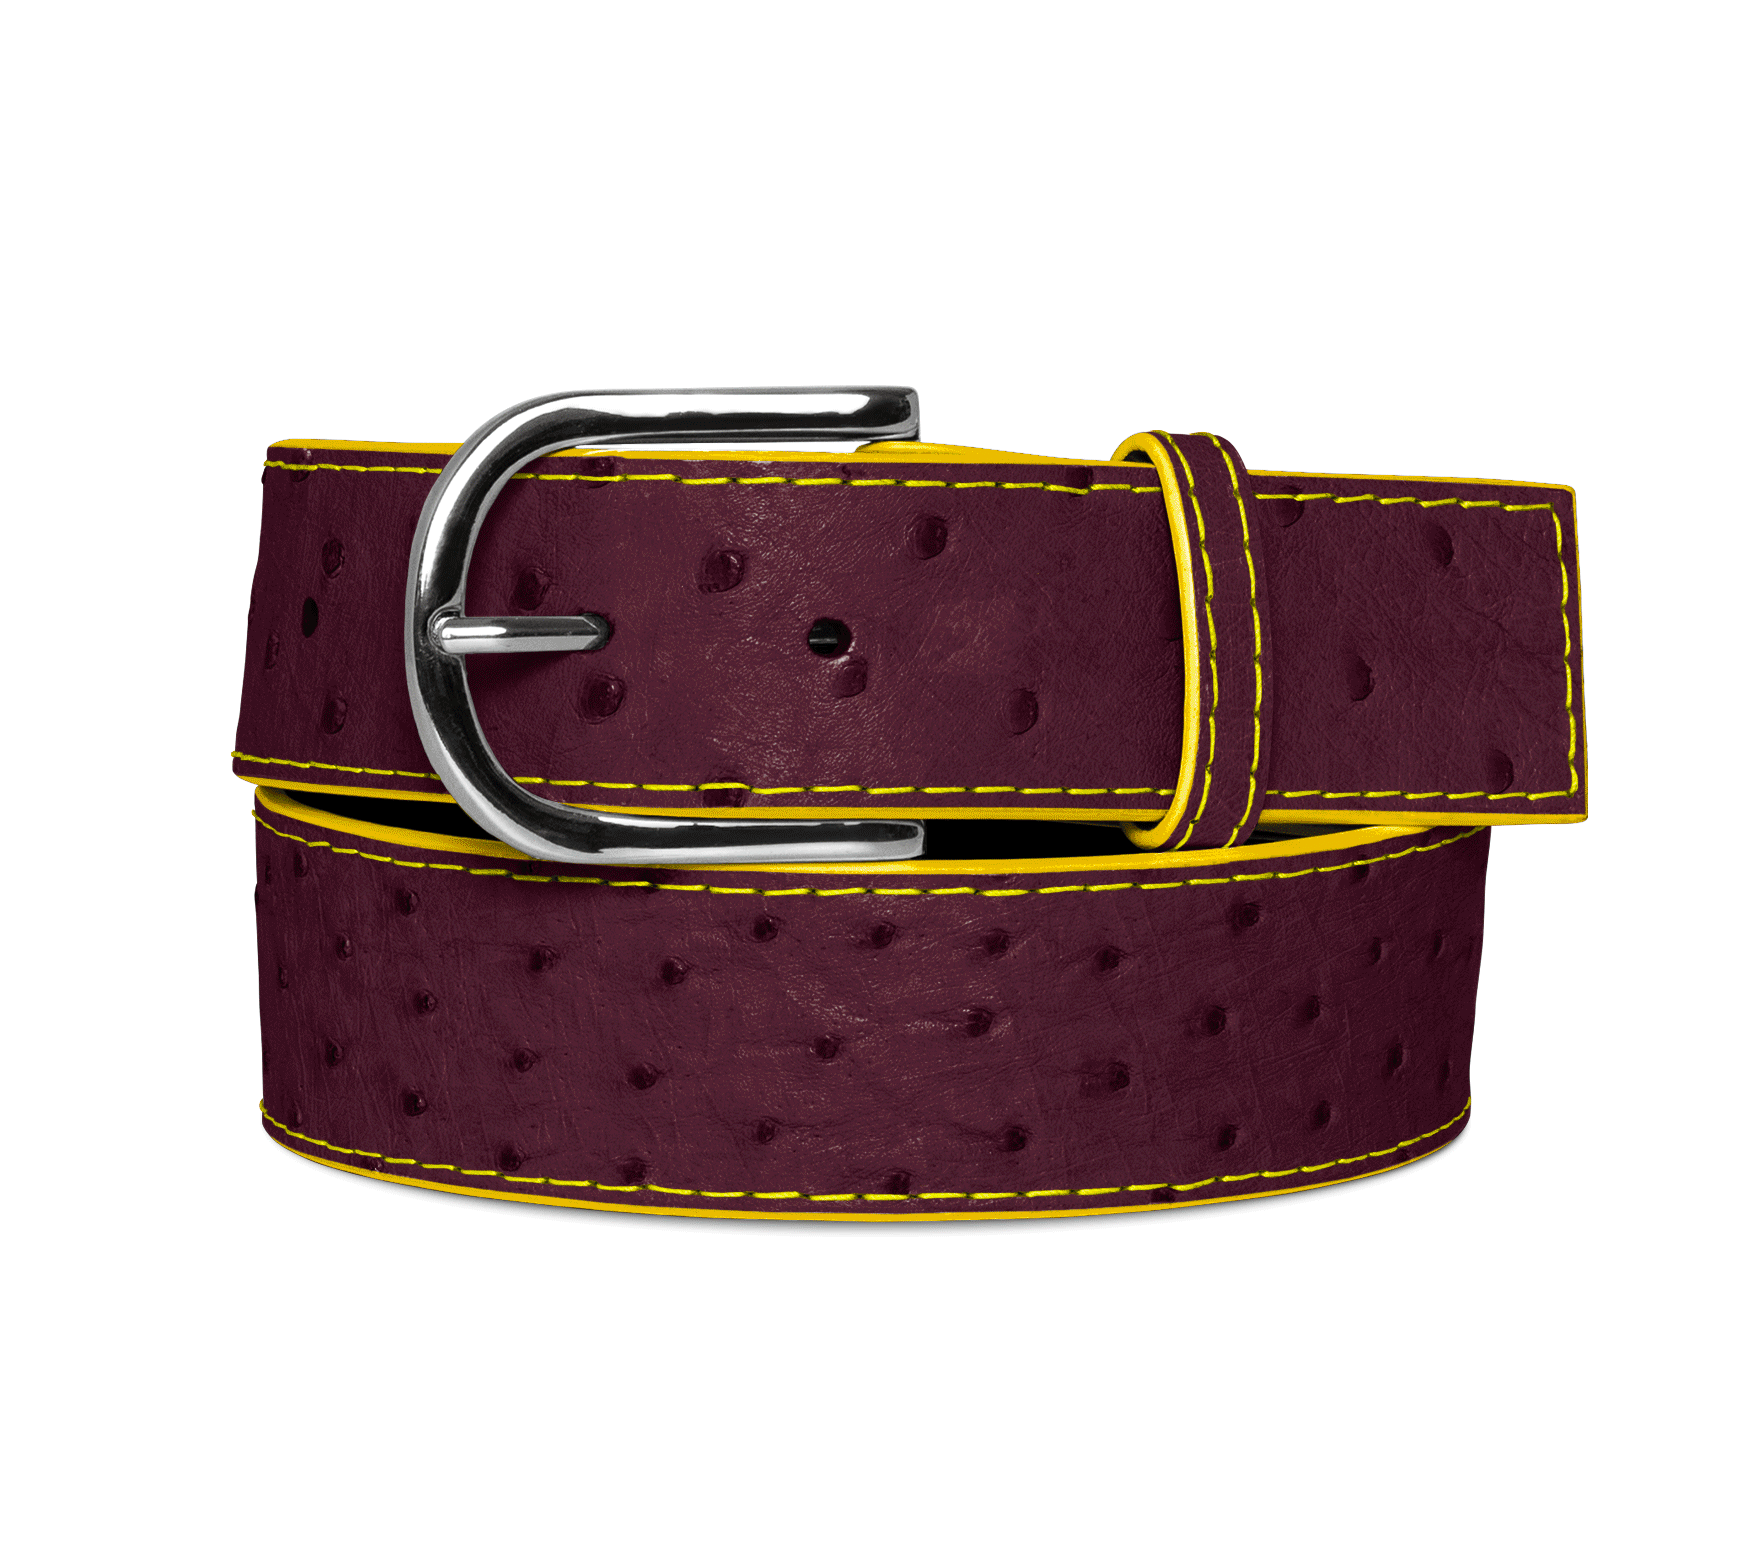 Reversible Belt Ostrich Leather Red 40 mm 1.5 with Belt W Buckle with Personalized Belt Buckle Christmas Gift